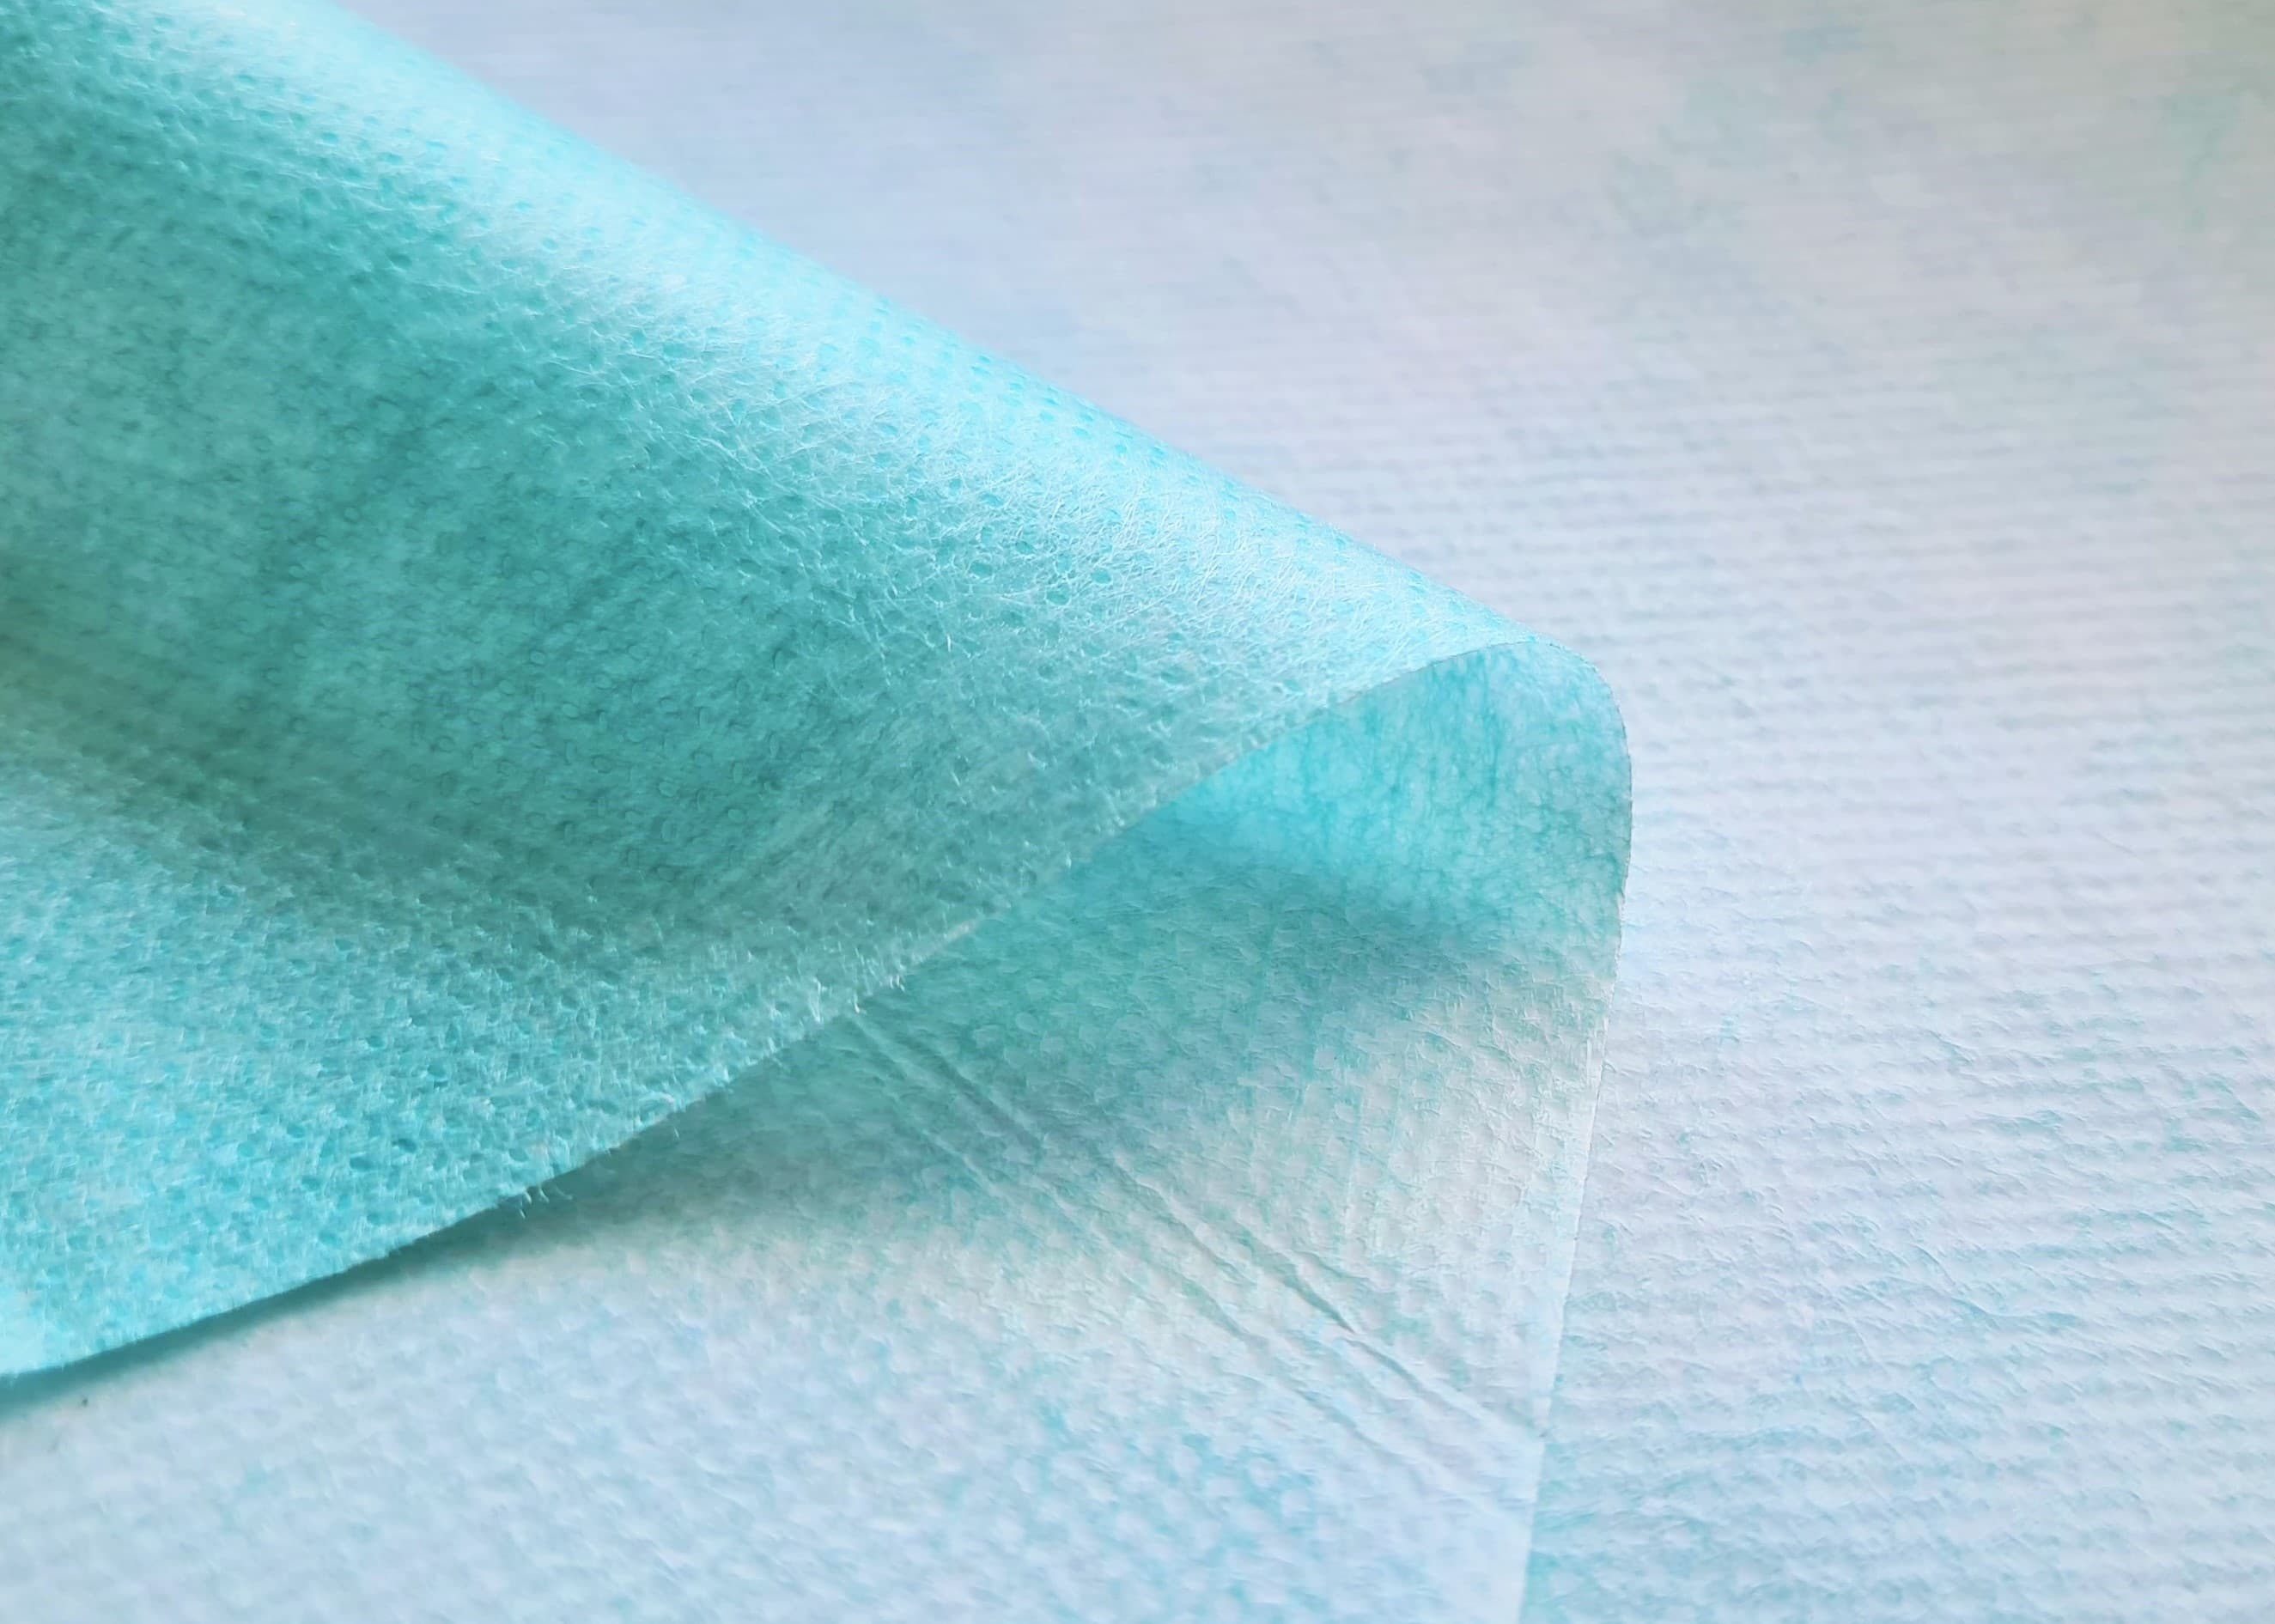 WSP thermal insulation nonwoven fabric - HOLTEX